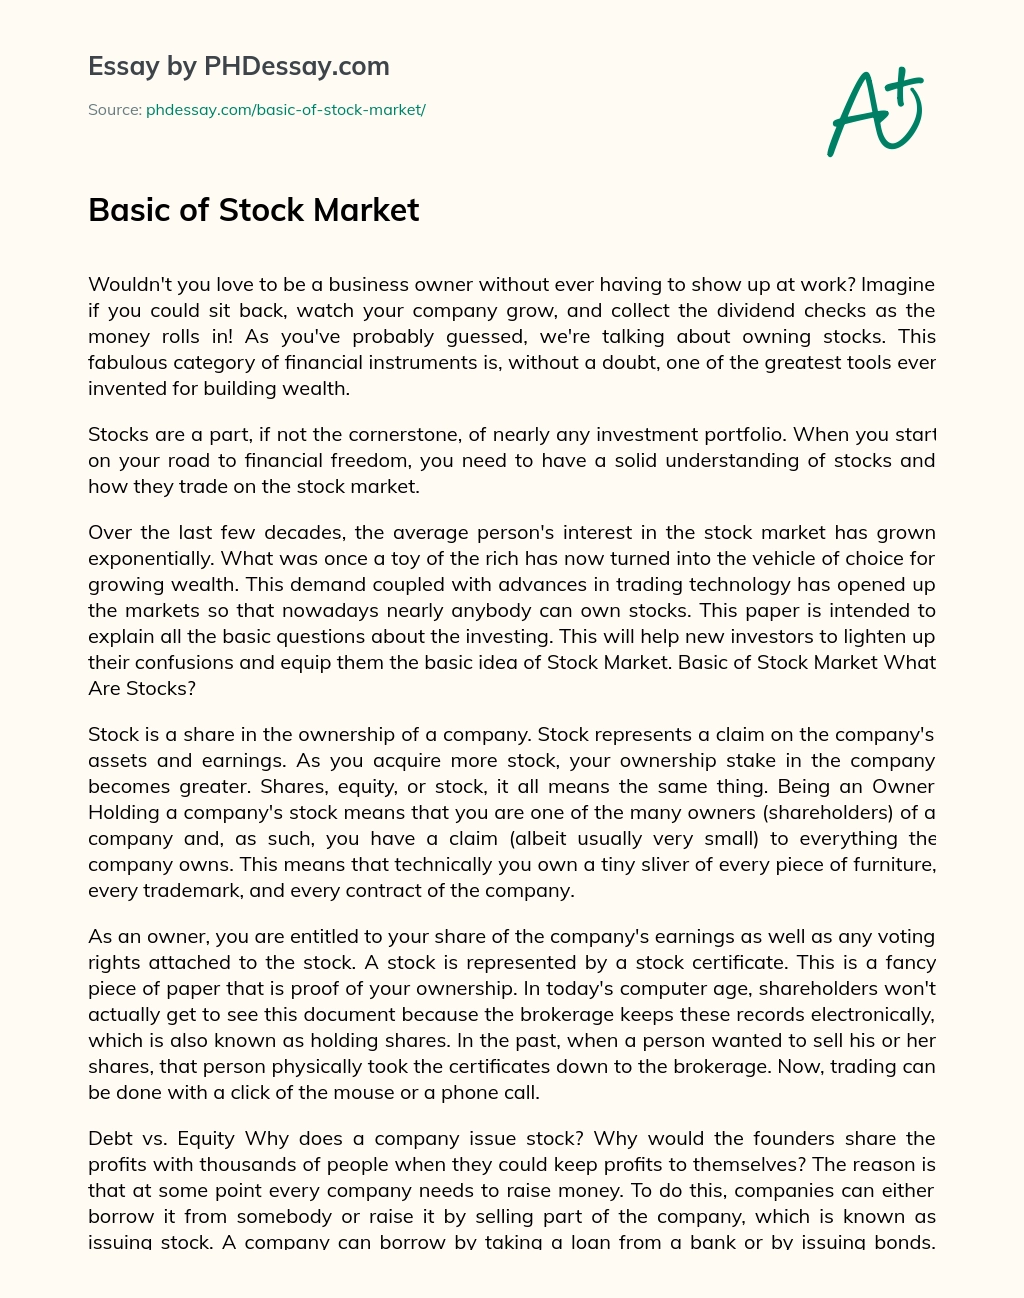 investing in the stock market essay